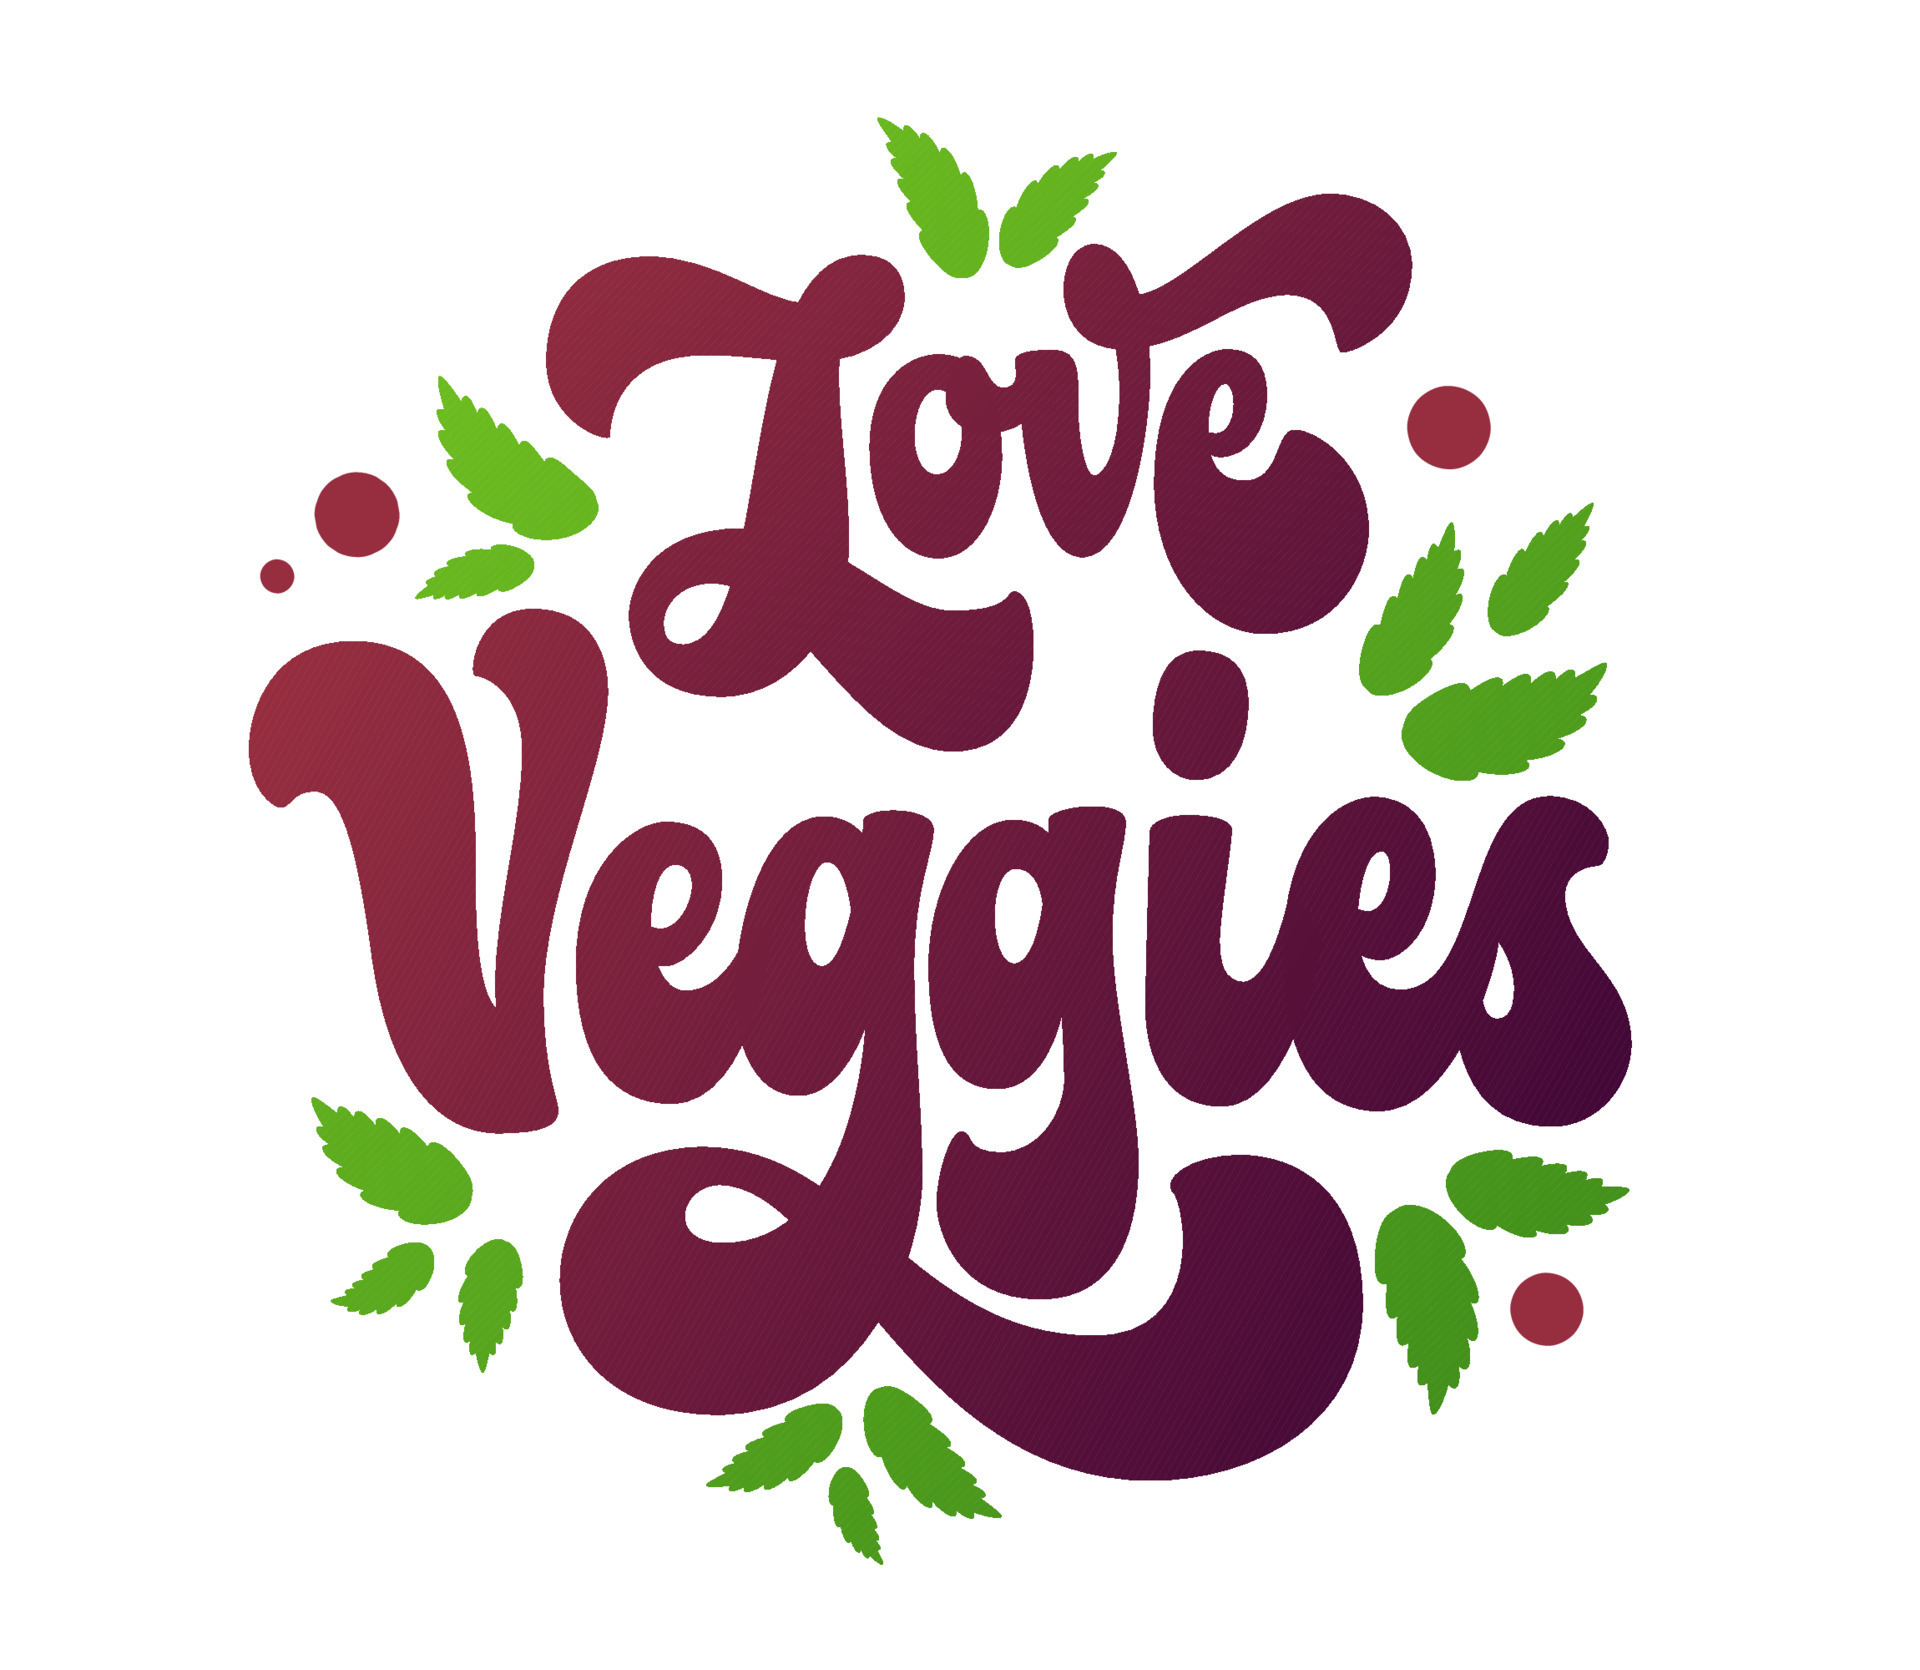 World Vegan Day - Modern Lettering Design with Trendy 70s Script Style.  Isolated Vector Typography Illustration Stock Vector - Illustration of  print, world: 269887041